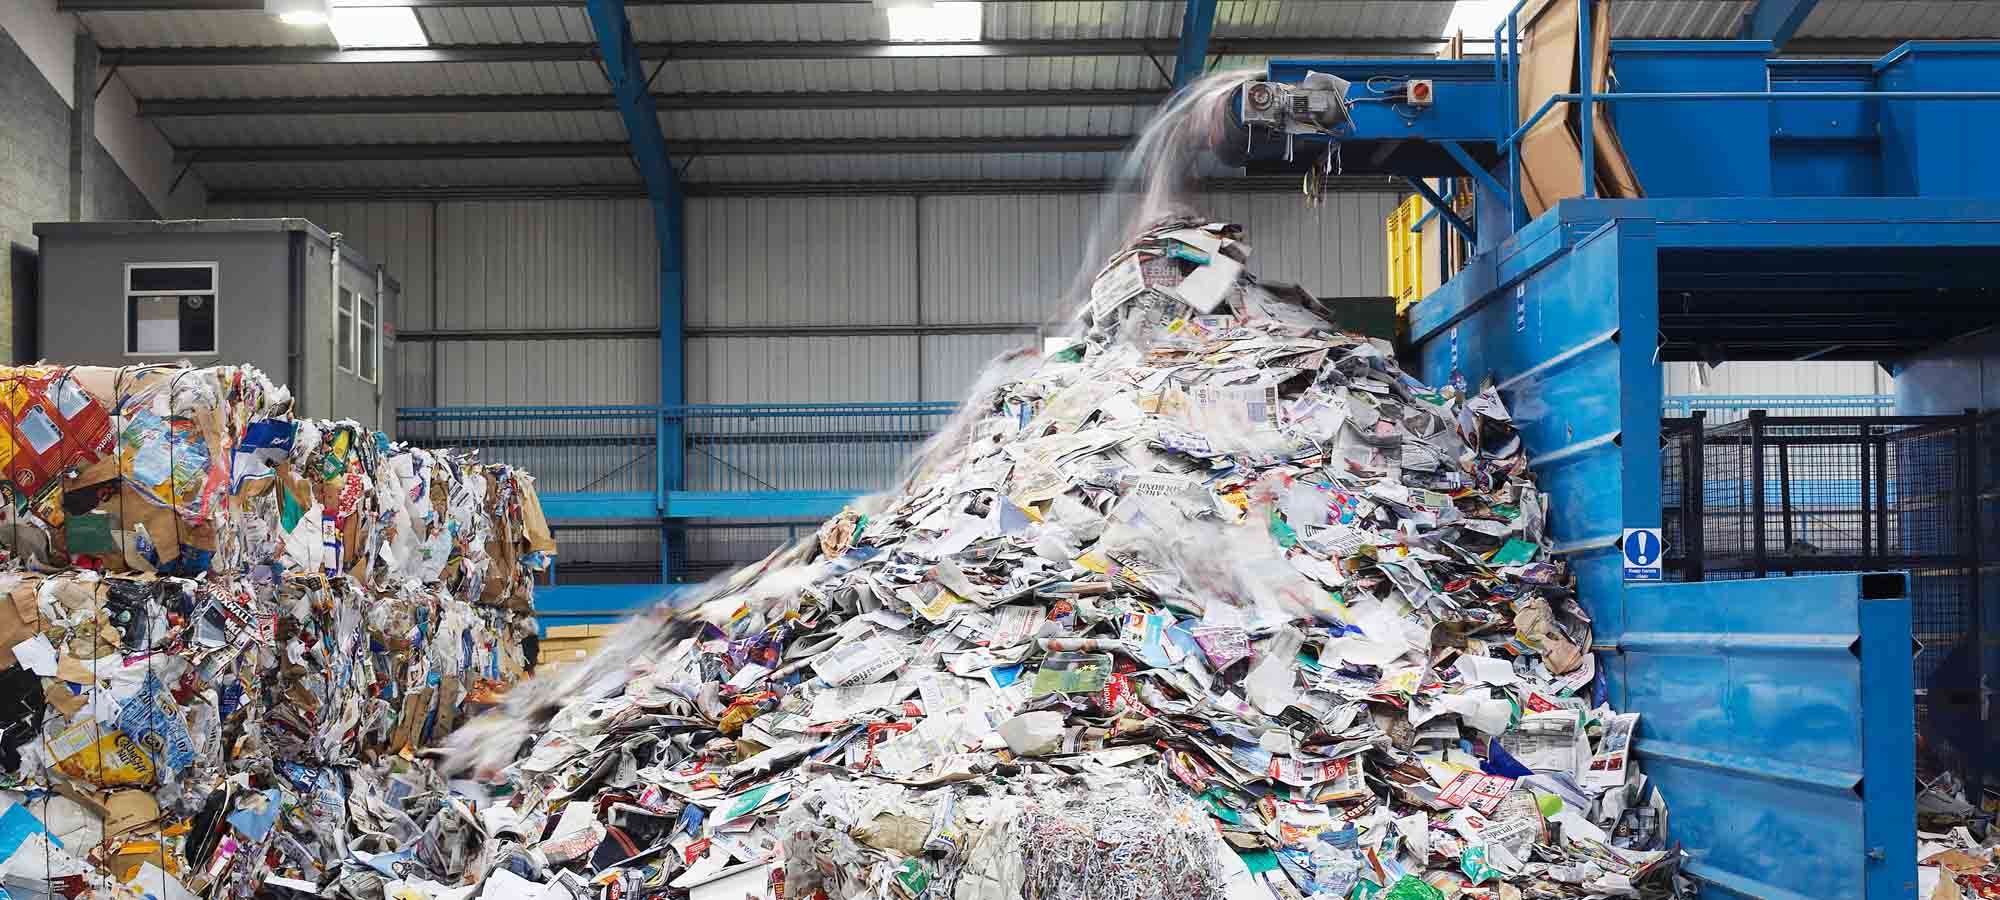 Australian manufacturer and supplier of conveyor to the recycling industry